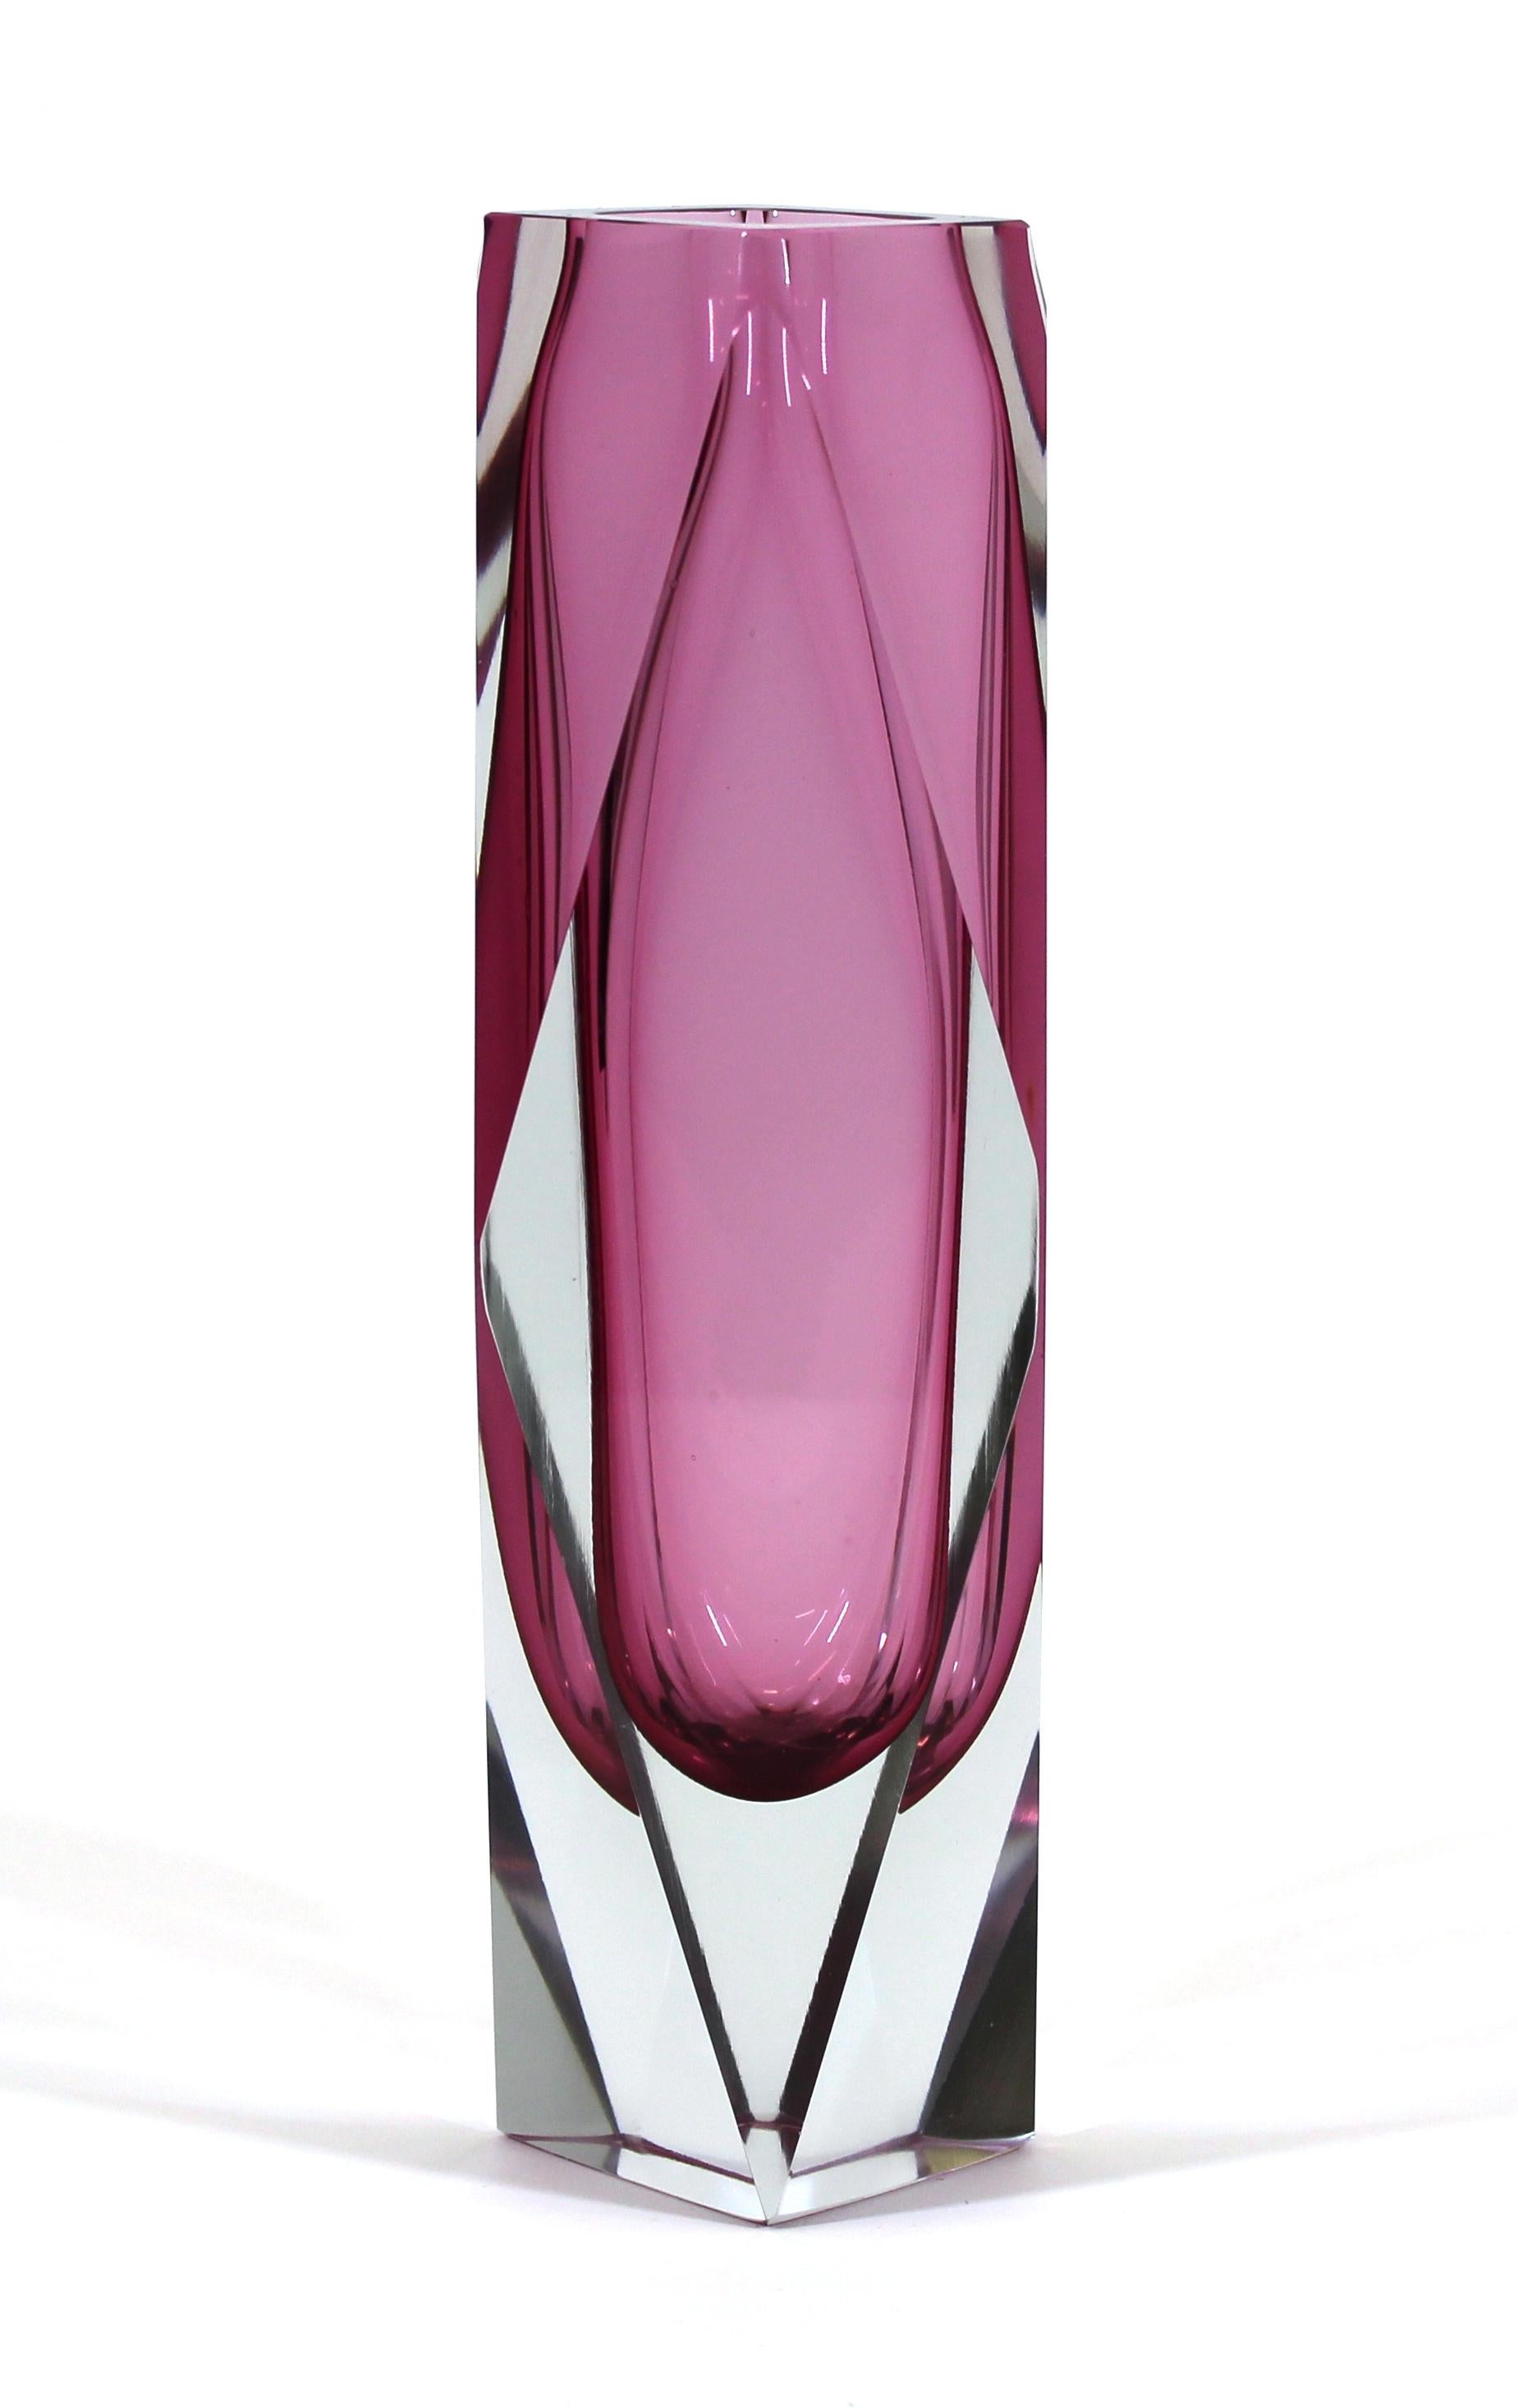 Italian modern pink glass vase made with the sommerso technique by Mandruzzato in Murano. In great vintage condition with age-appropriate wear.